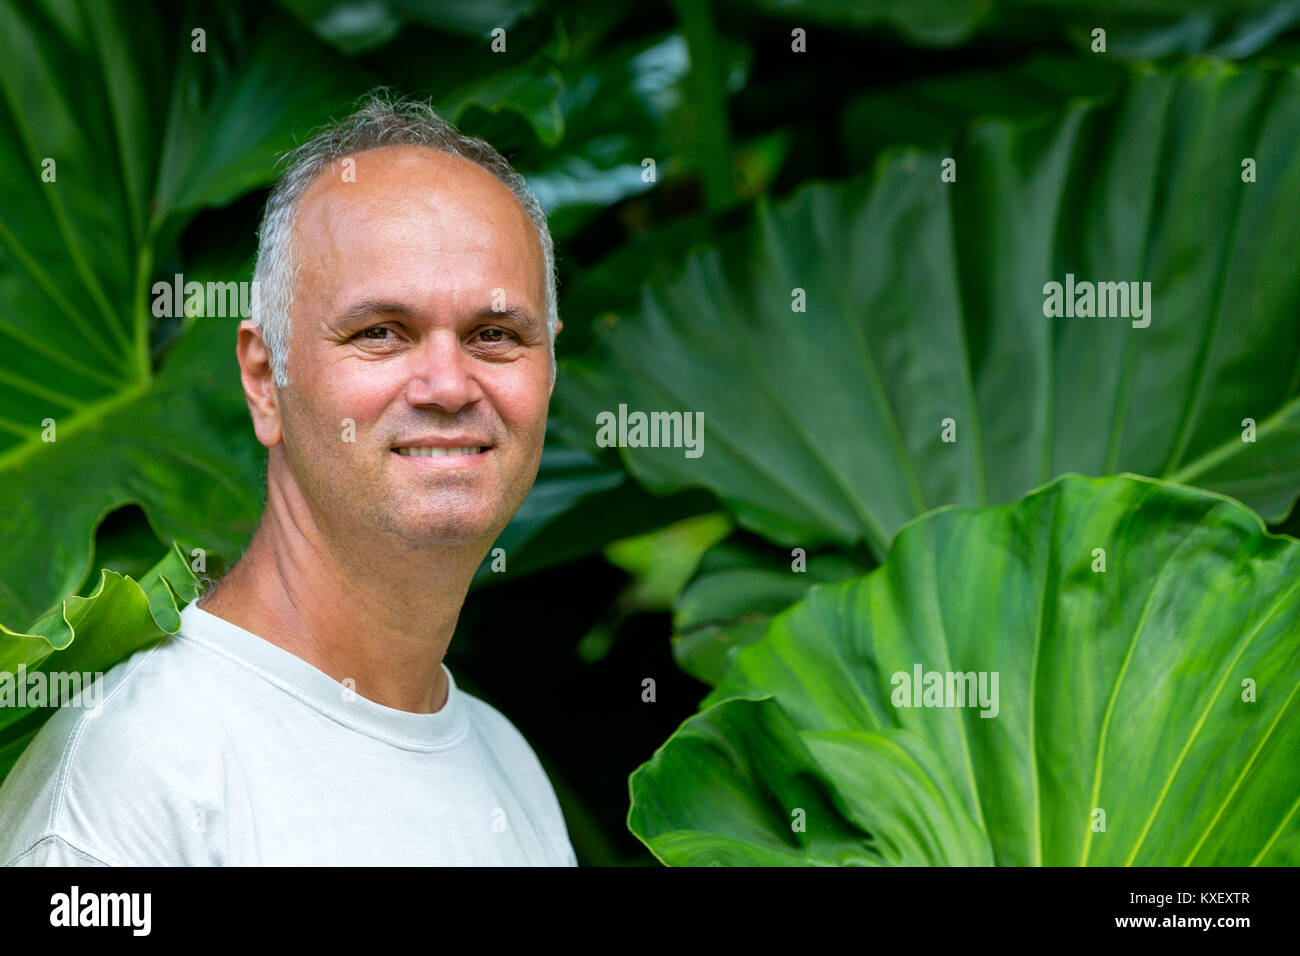 Attractive middle-aged man with a tall lush green plant of Hawaiian Philodendron giganteum behind him showing the relative height of the leaves of the Stock Photo